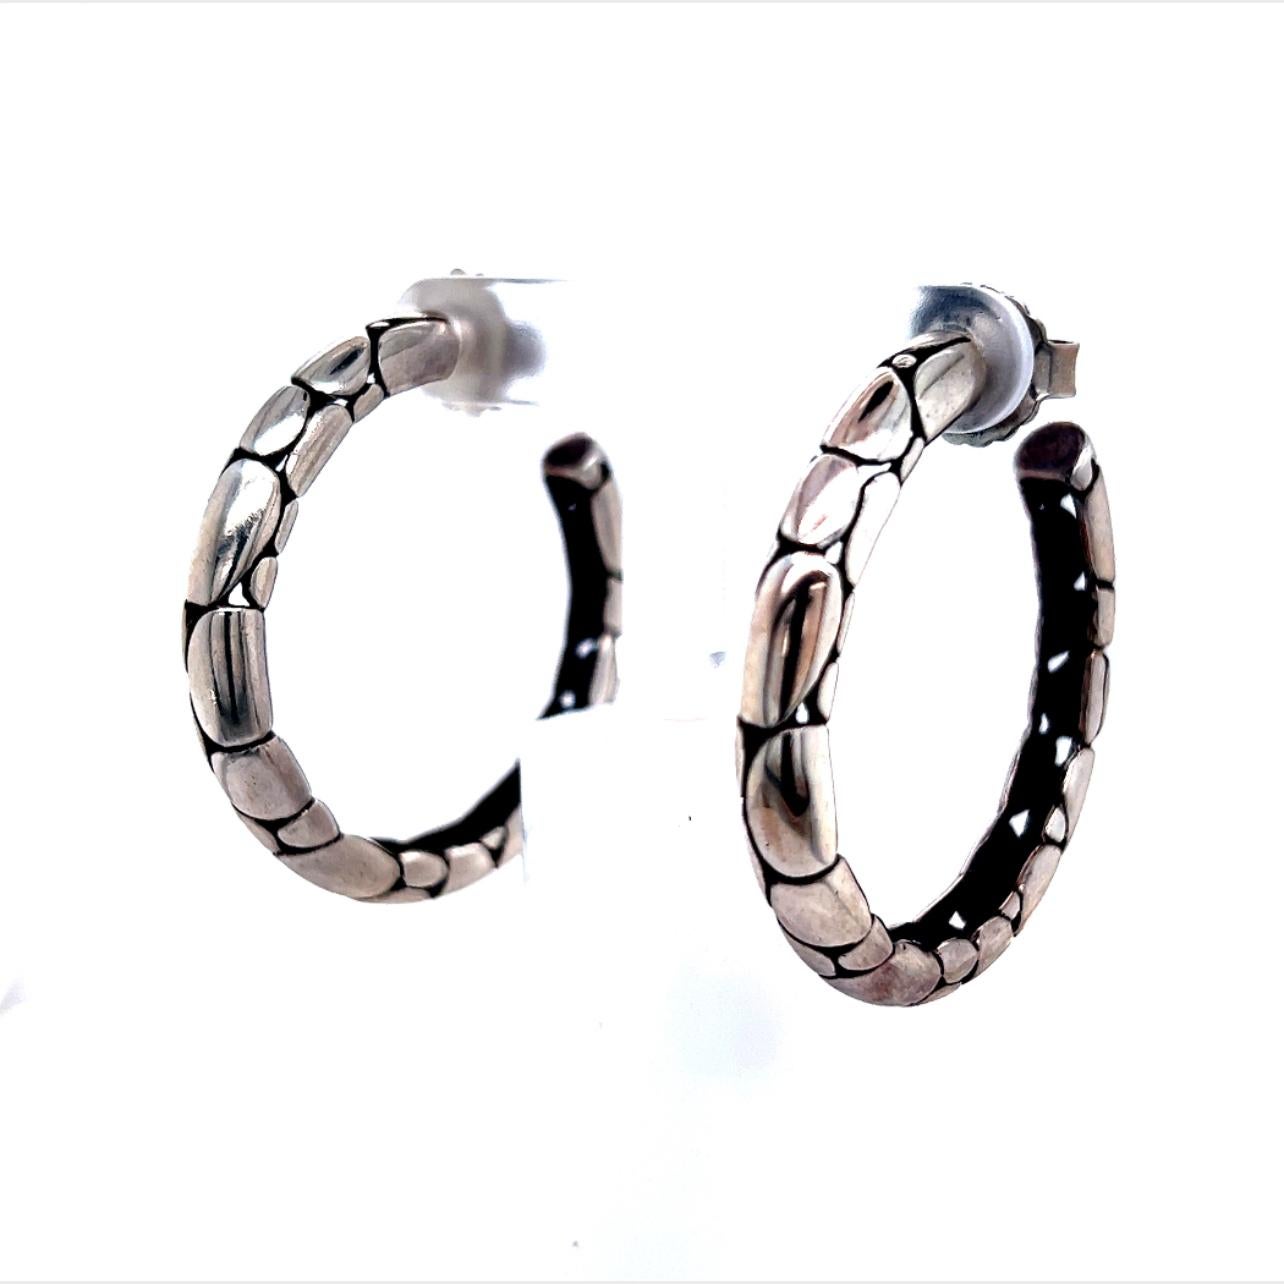 John Hardy Estate Pebble Hoop Earrings Sterling Silver JH20

TRUSTED SELLER SINCE 2002

PLEASE SEE OUR HUNDREDS OF POSITIVE FEEDBACKS FROM OUR CLIENTS!!

FREE SHIPPING!!

DETAILS
Style: Pebble
Earrings: Hoop
Drop: 1.5 Inches
Weight: 14.9